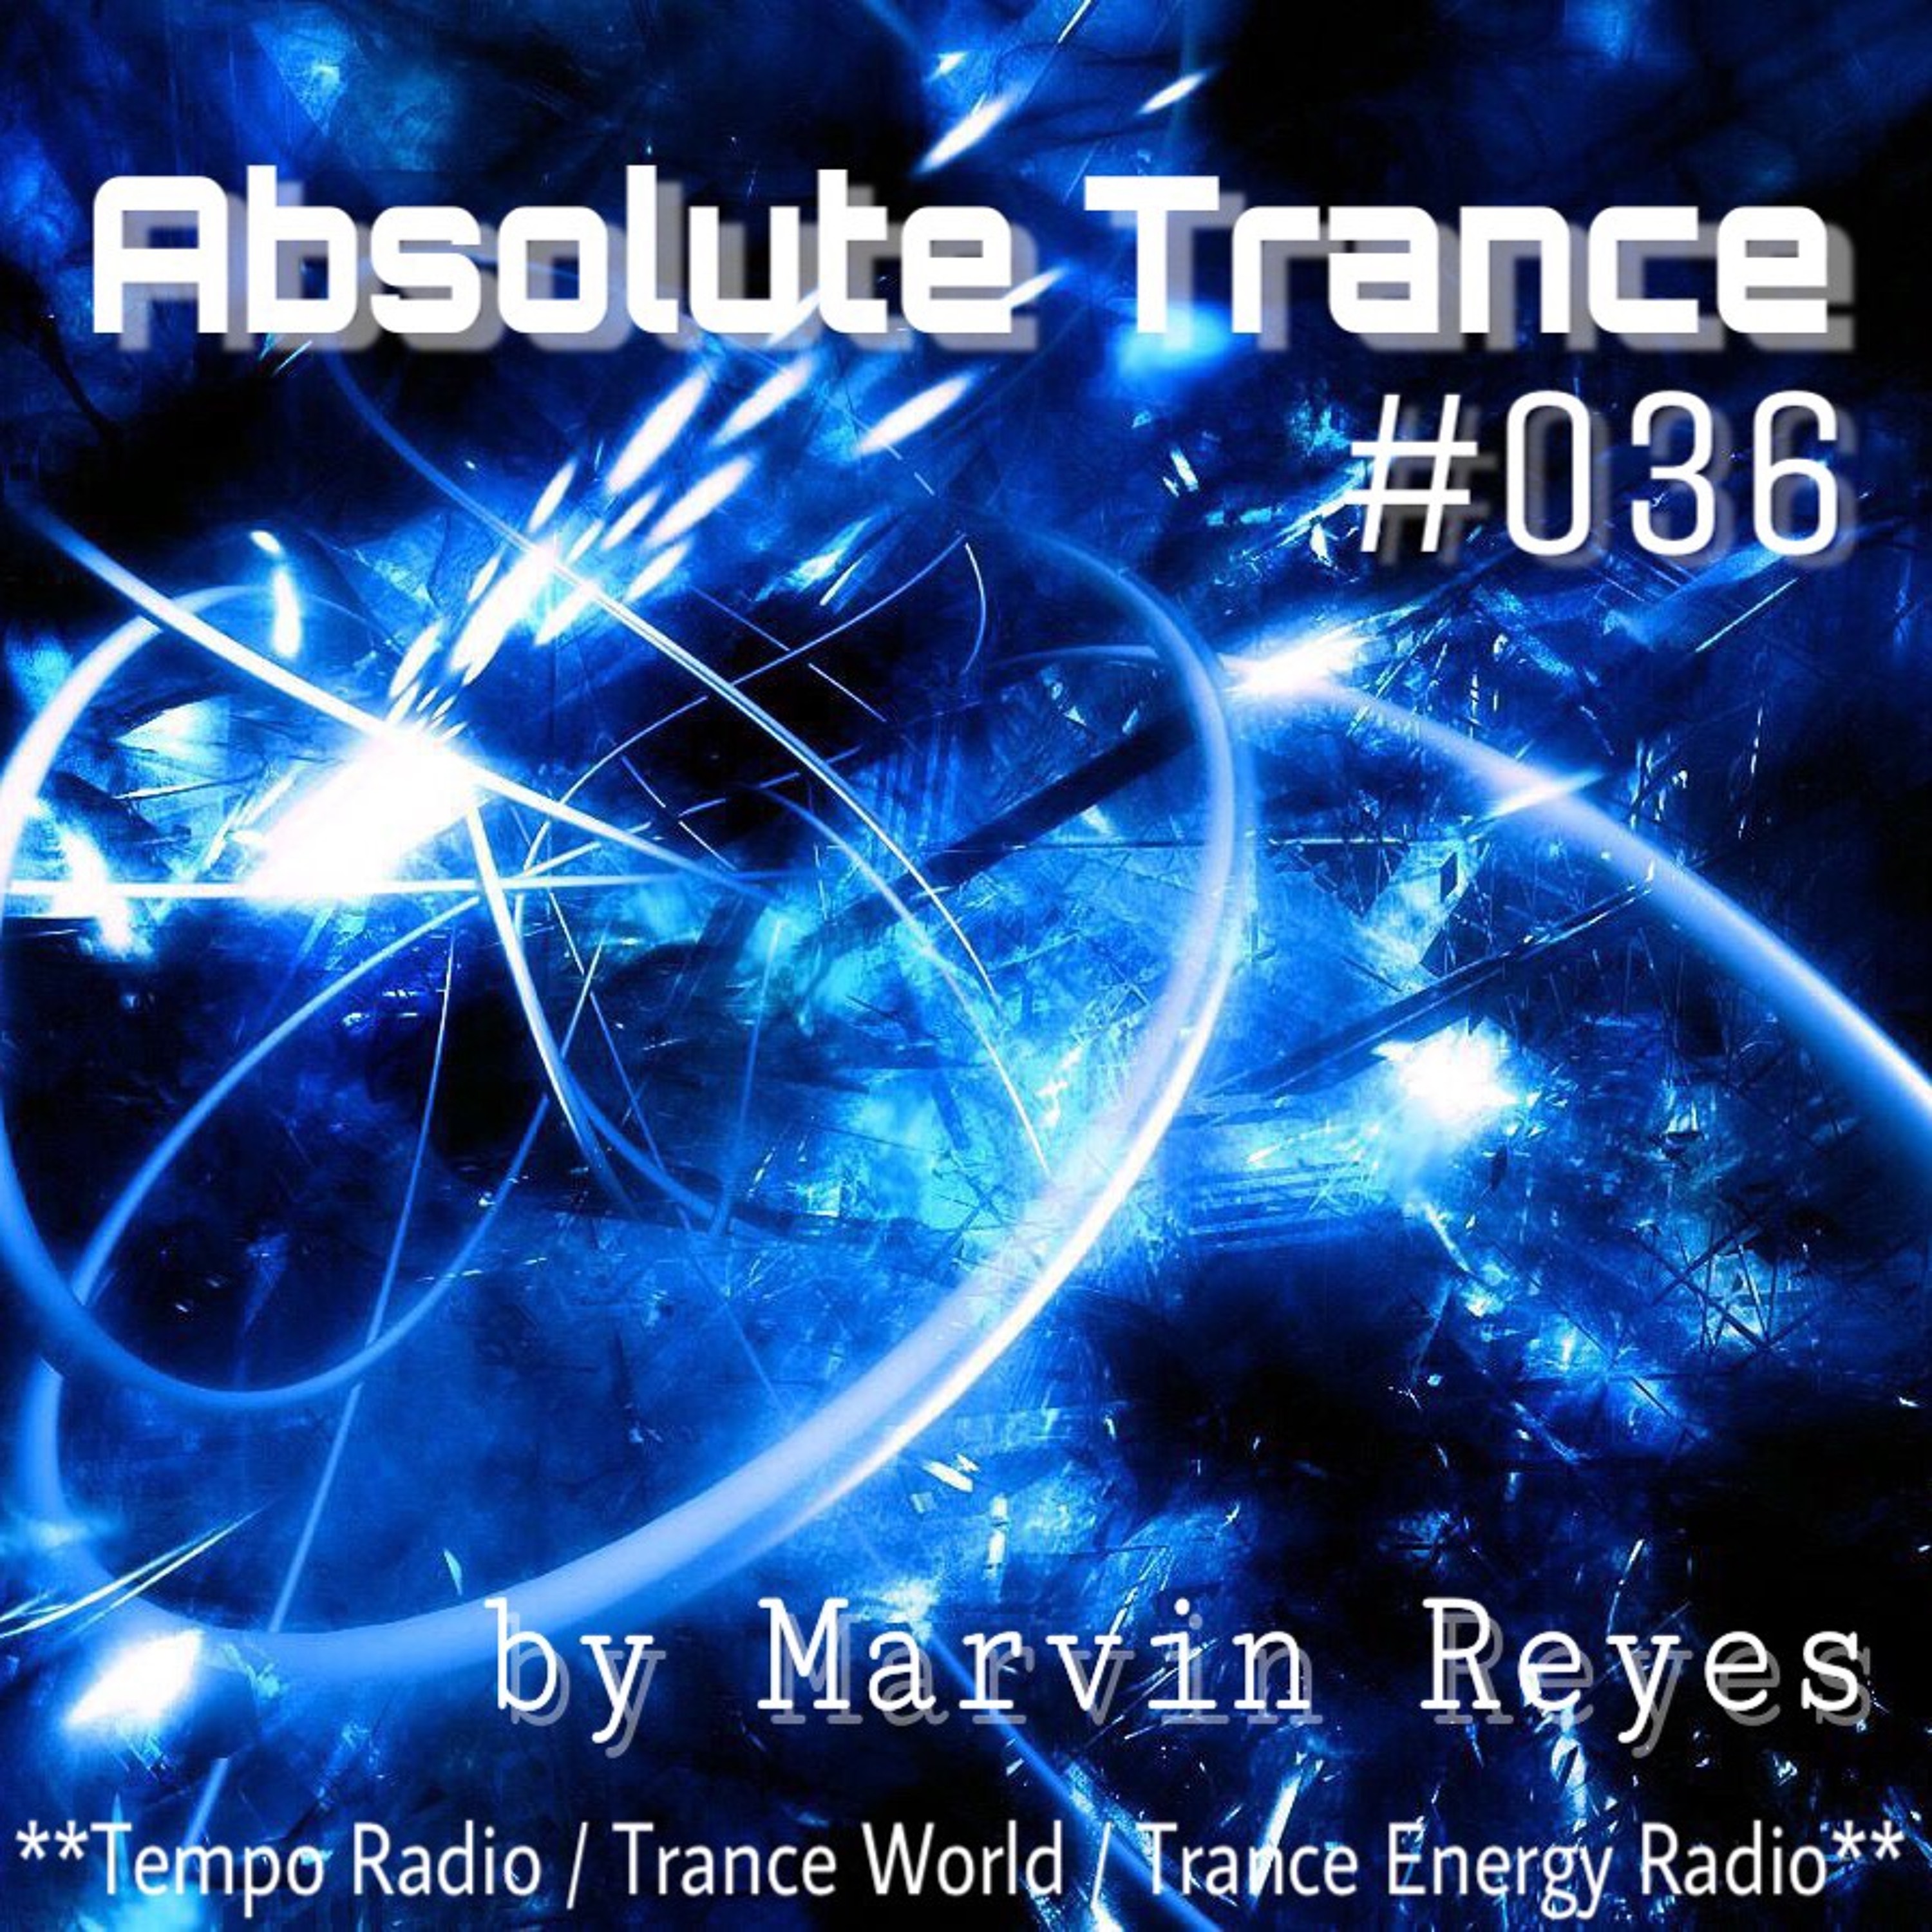 Absolute Trance #036